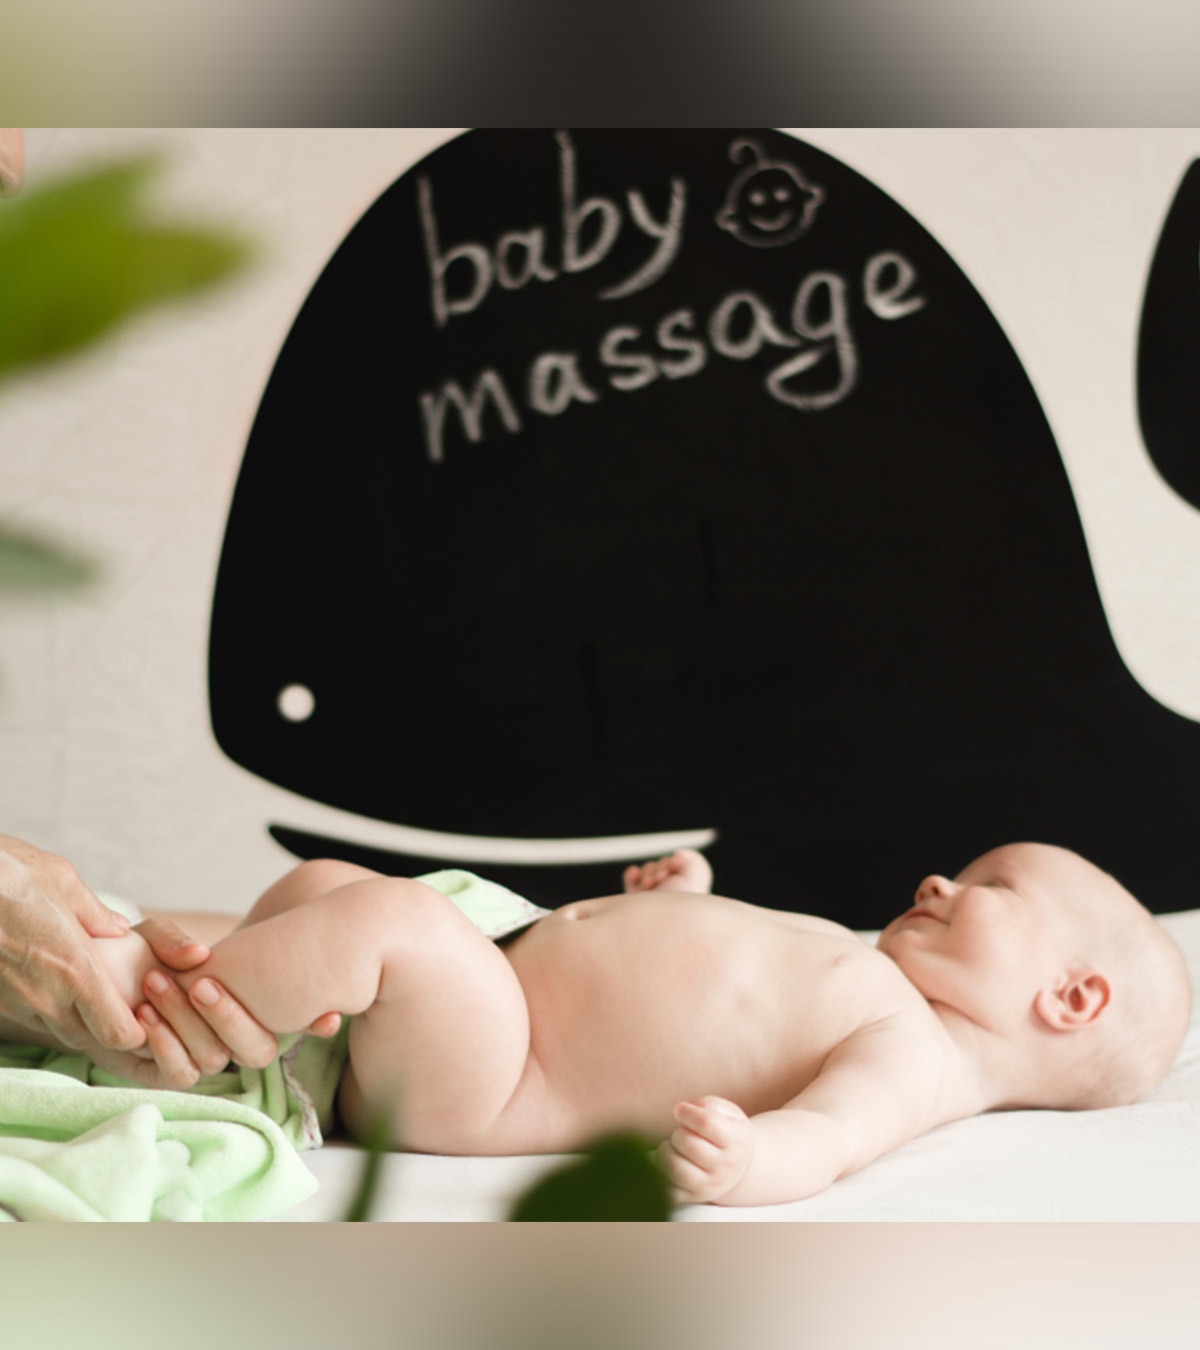 5 Things You Should Know Before Choosing The Right Oil For Your Baby’s Massage